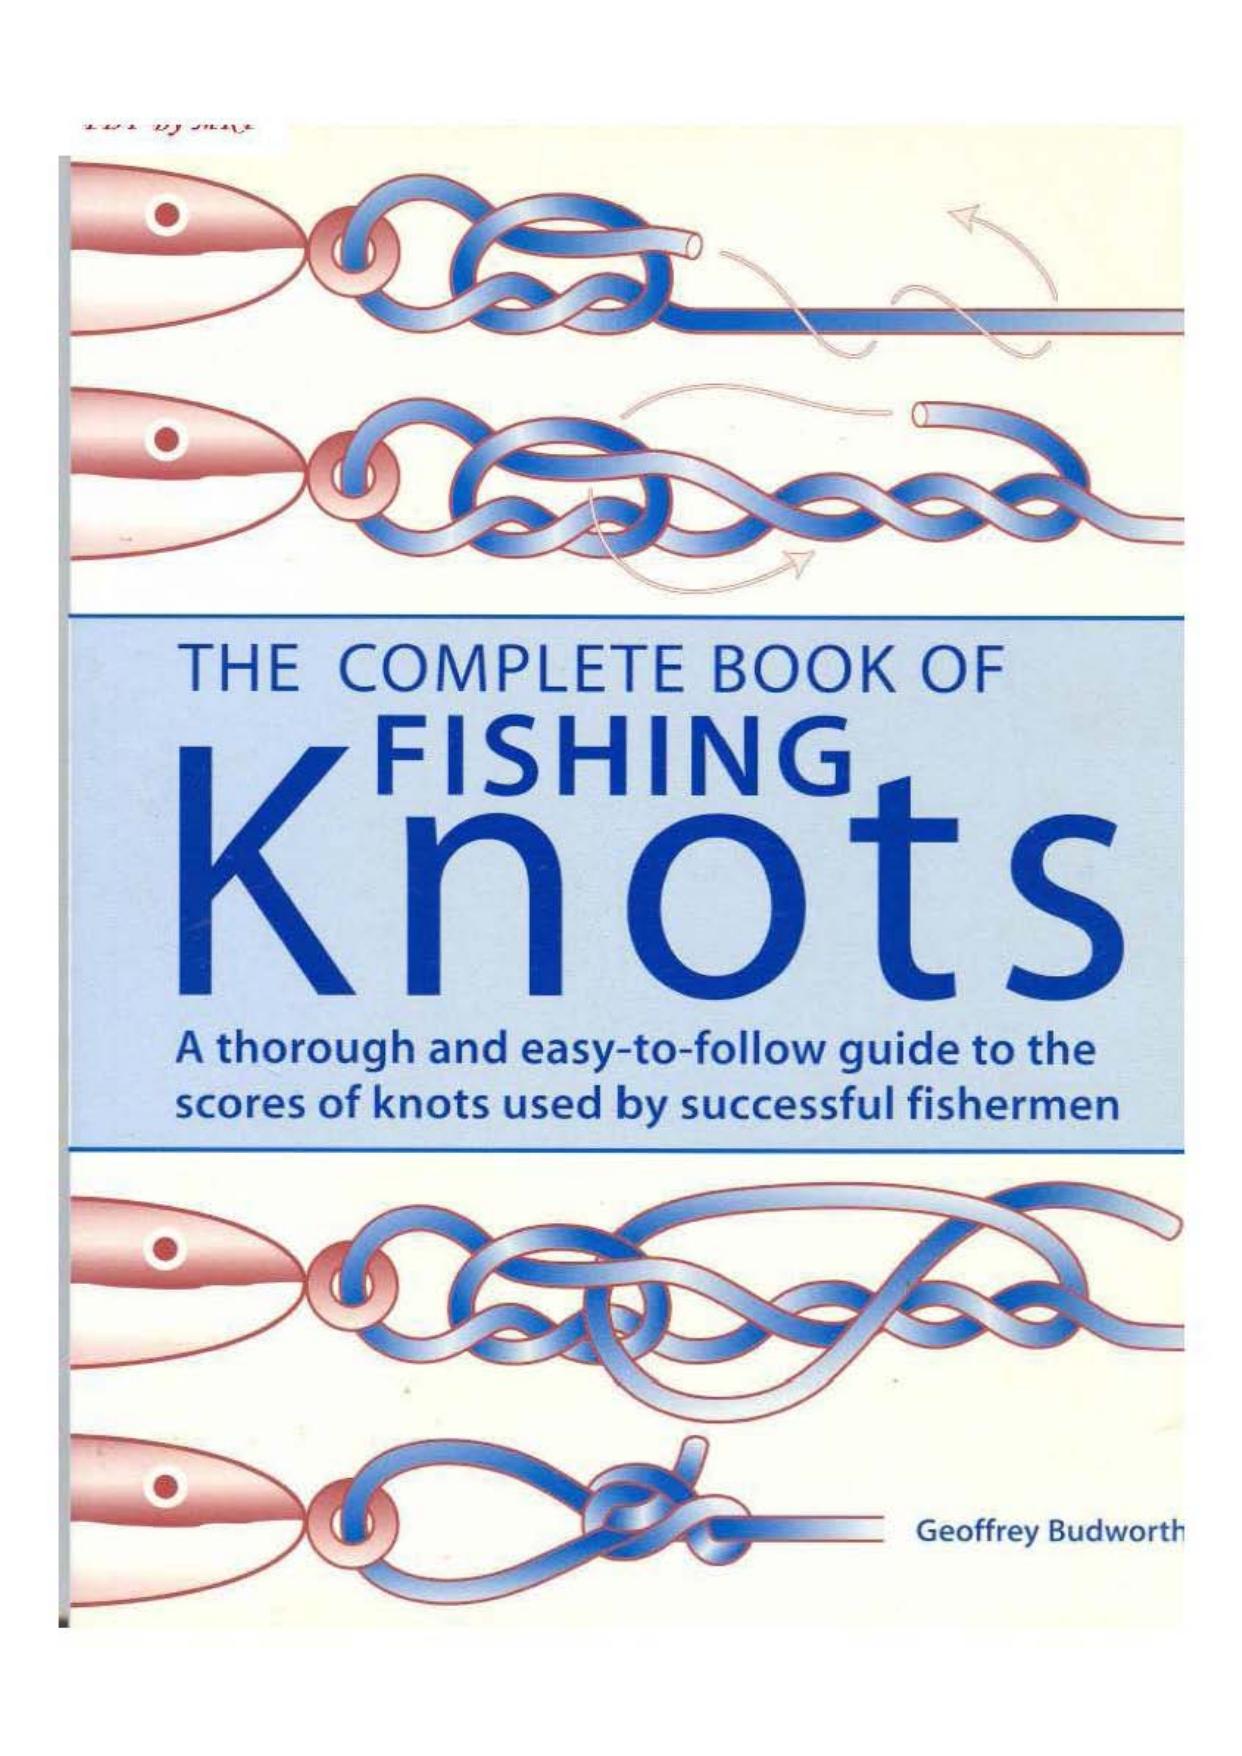 The Complete Book of Fishing Knots: A Though and Easy-To-Follow Guide to the Scores of Knots Used by Successful Fishermen